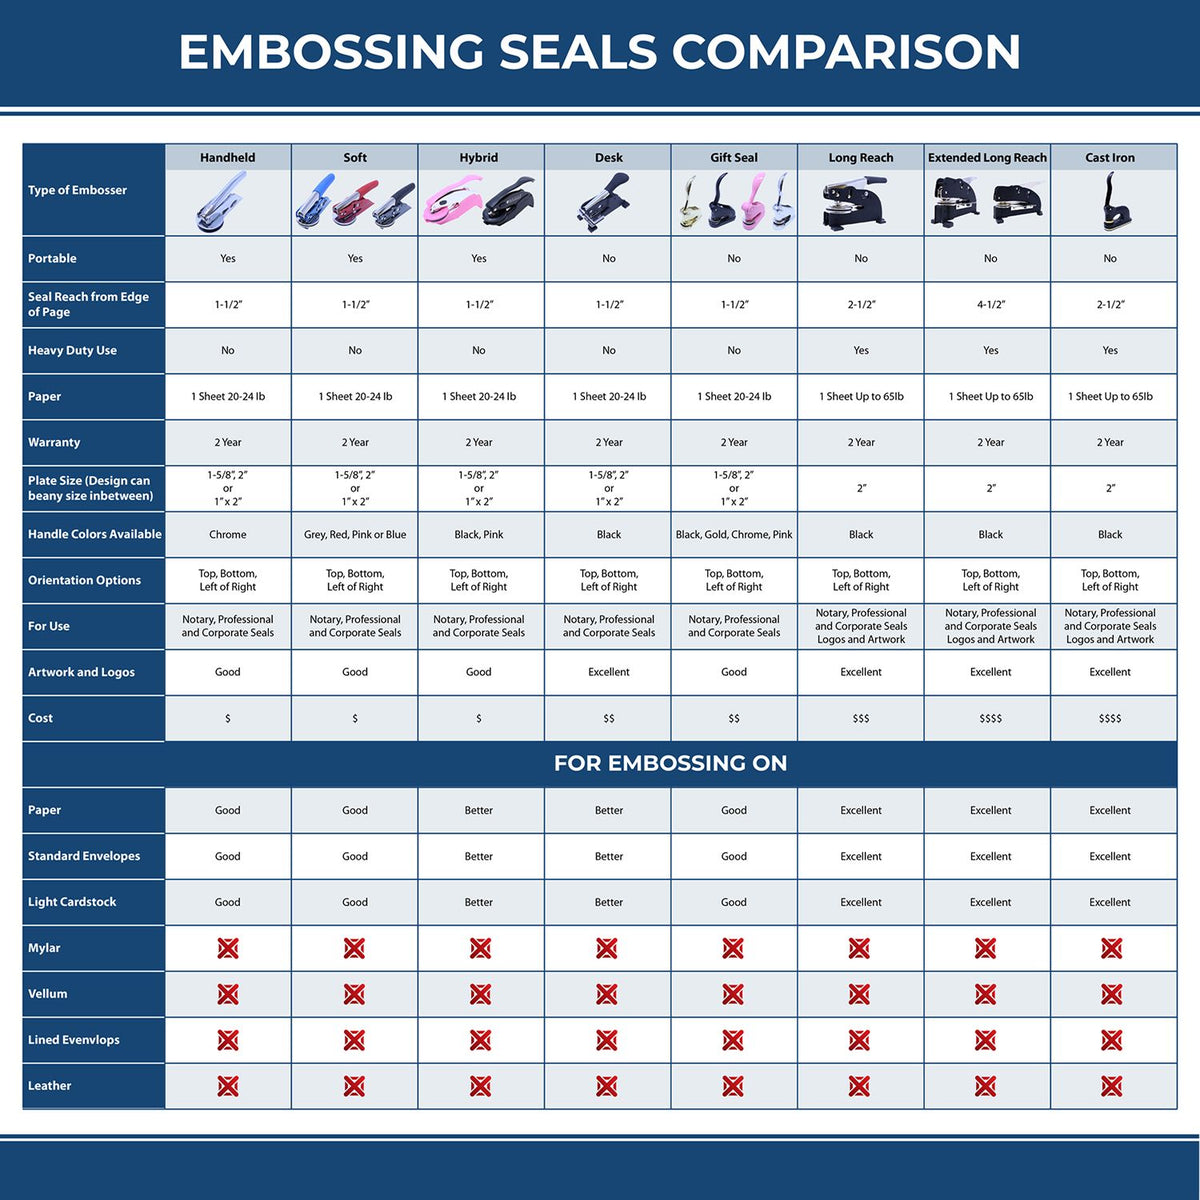 A comparison chart for the different types of mount models available for the Soft Pocket Vermont Landscape Architect Embosser.